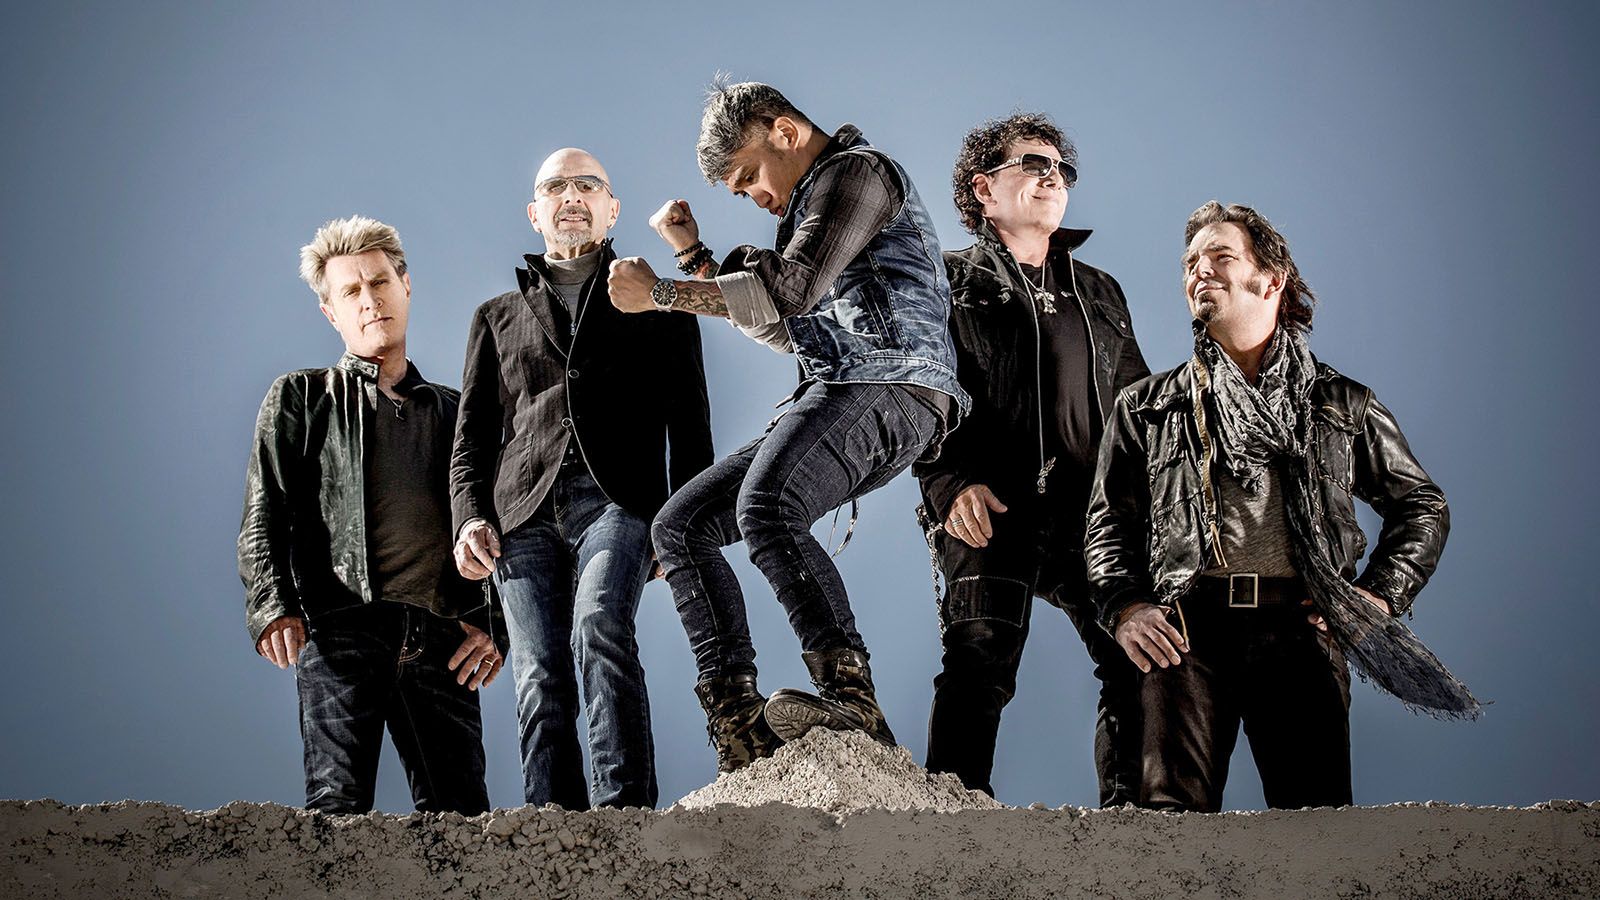 Journey will bring their Freedom Tour, along with Toto, to Memorial Coliseum on April 19.